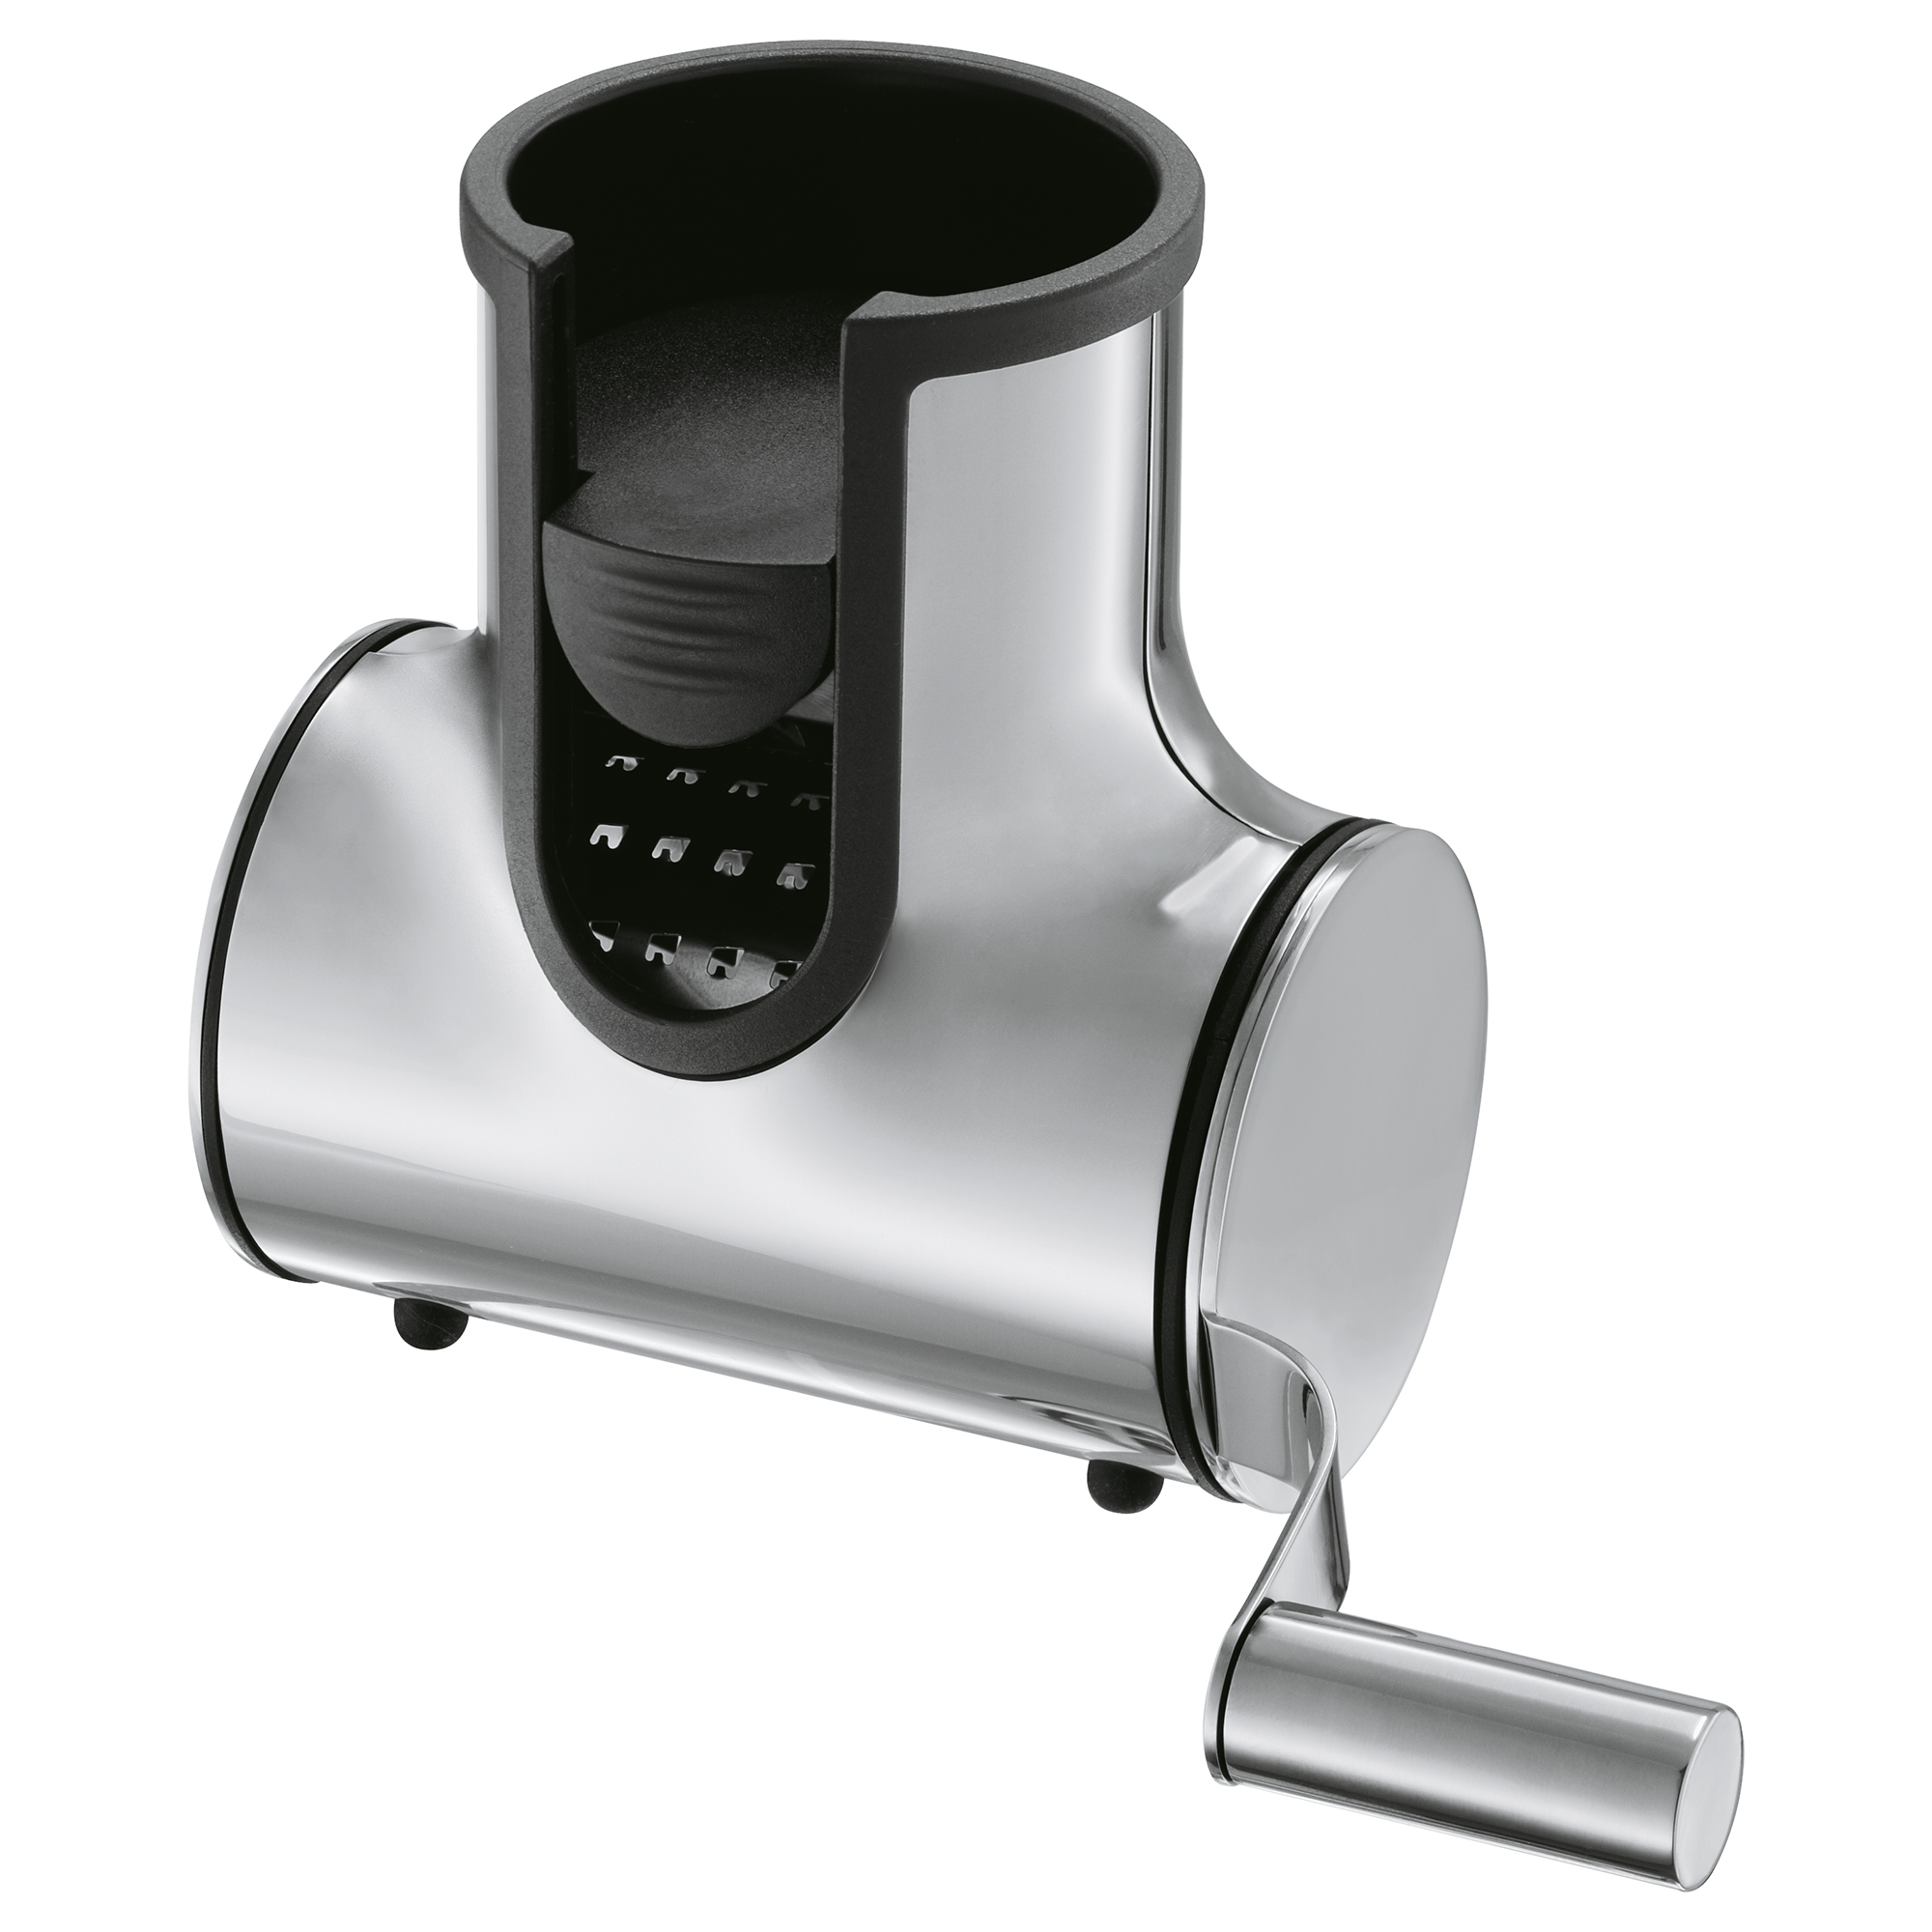 Buy Cheese Mill - online at RÖSLE GmbH & Co. KG